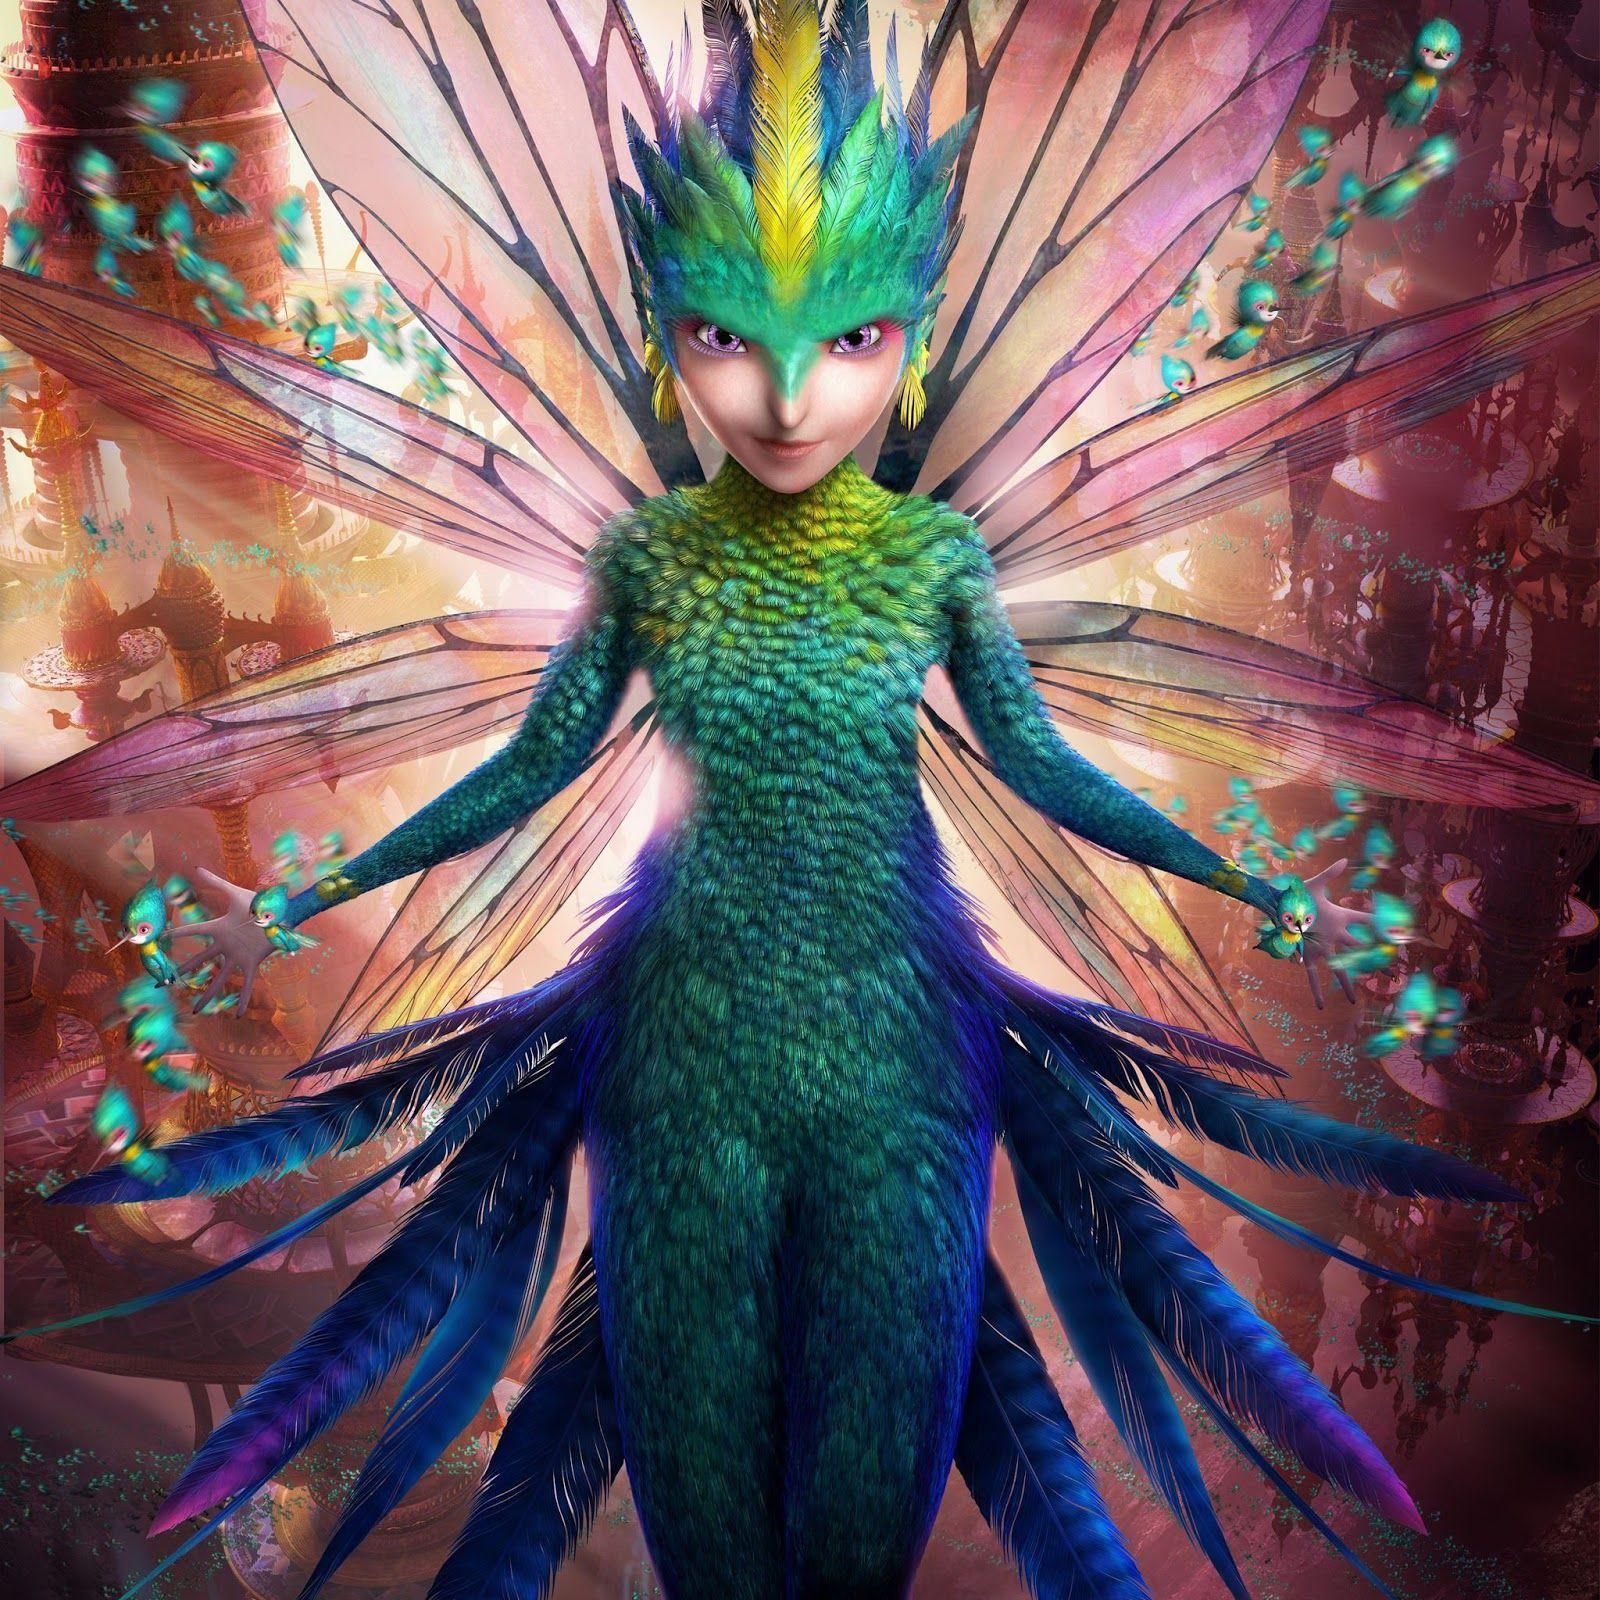 iPad Wallpaper: Free Download Rise of the Guardians iPad